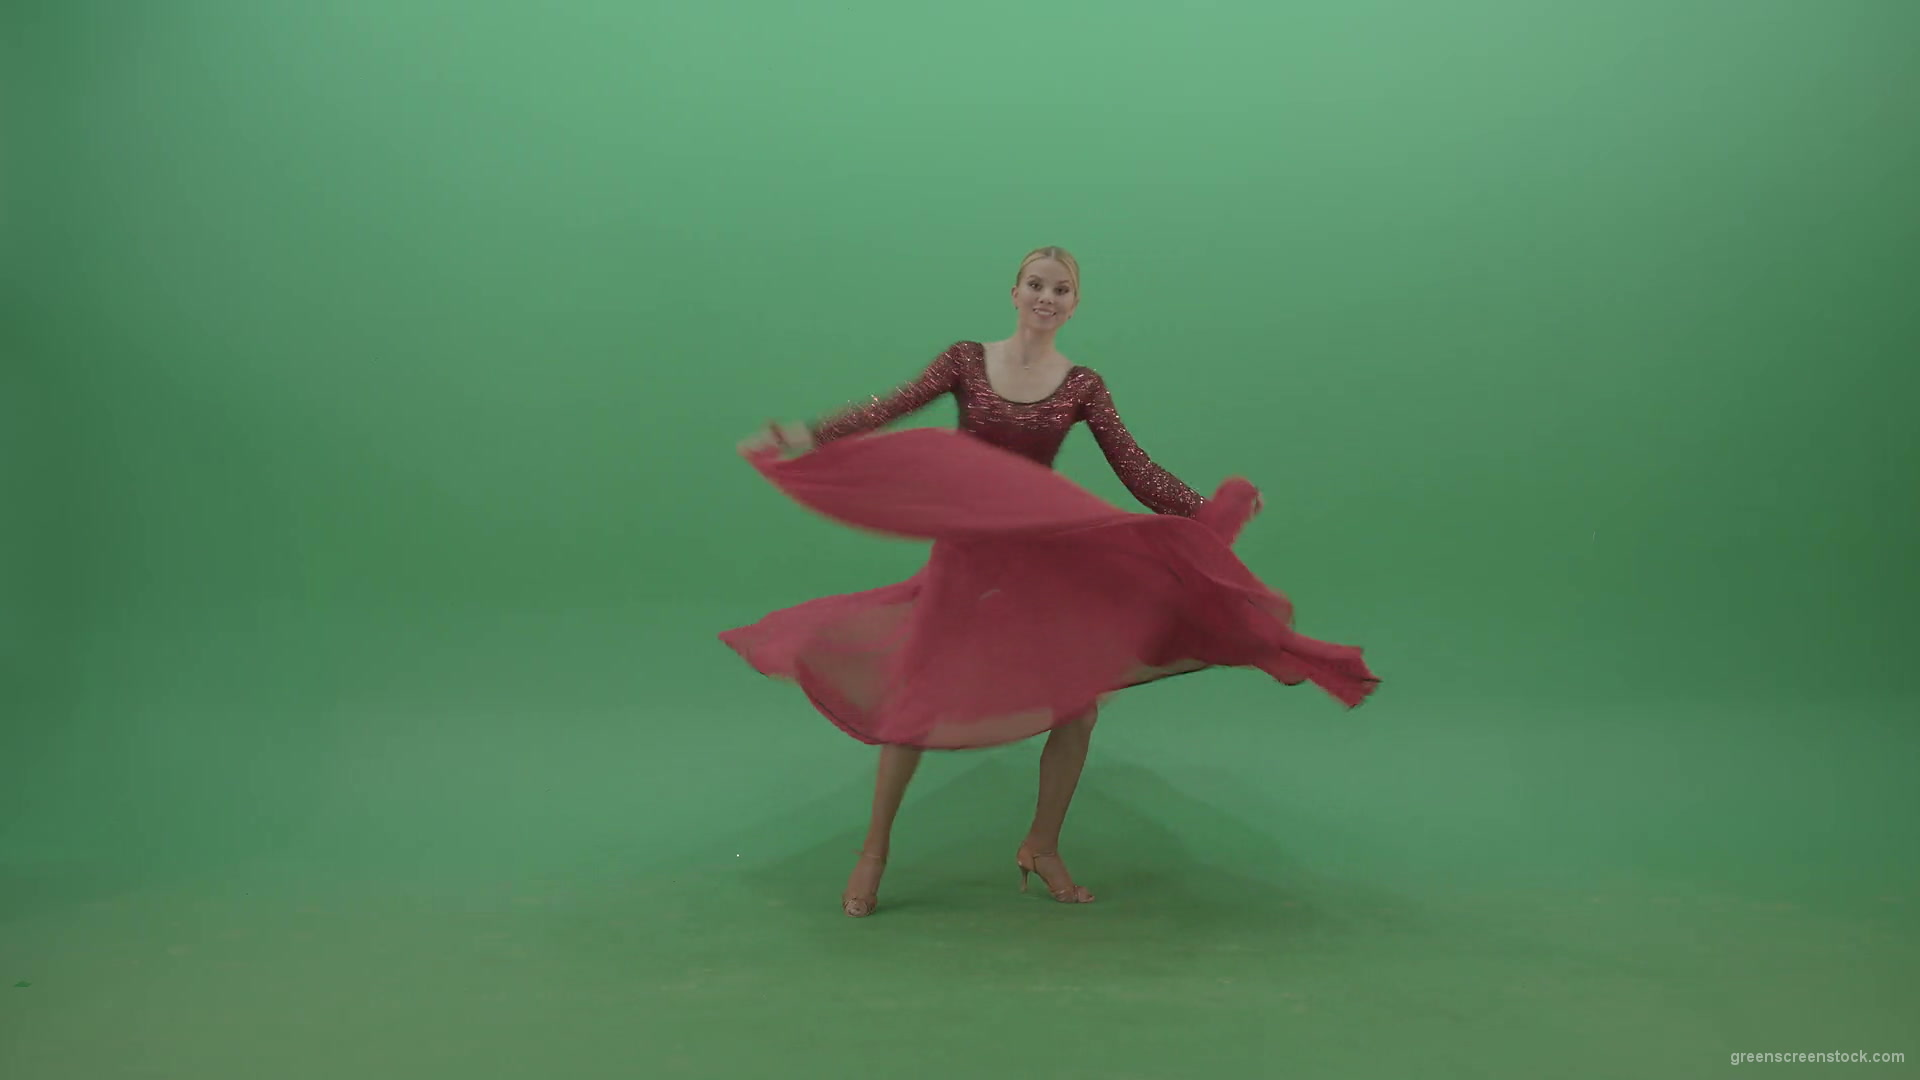 Spinning-woman-in-red-dress-showing-dance-flamenco-moves-over-green-screen-4K-Video-Footage-1920_008 Green Screen Stock